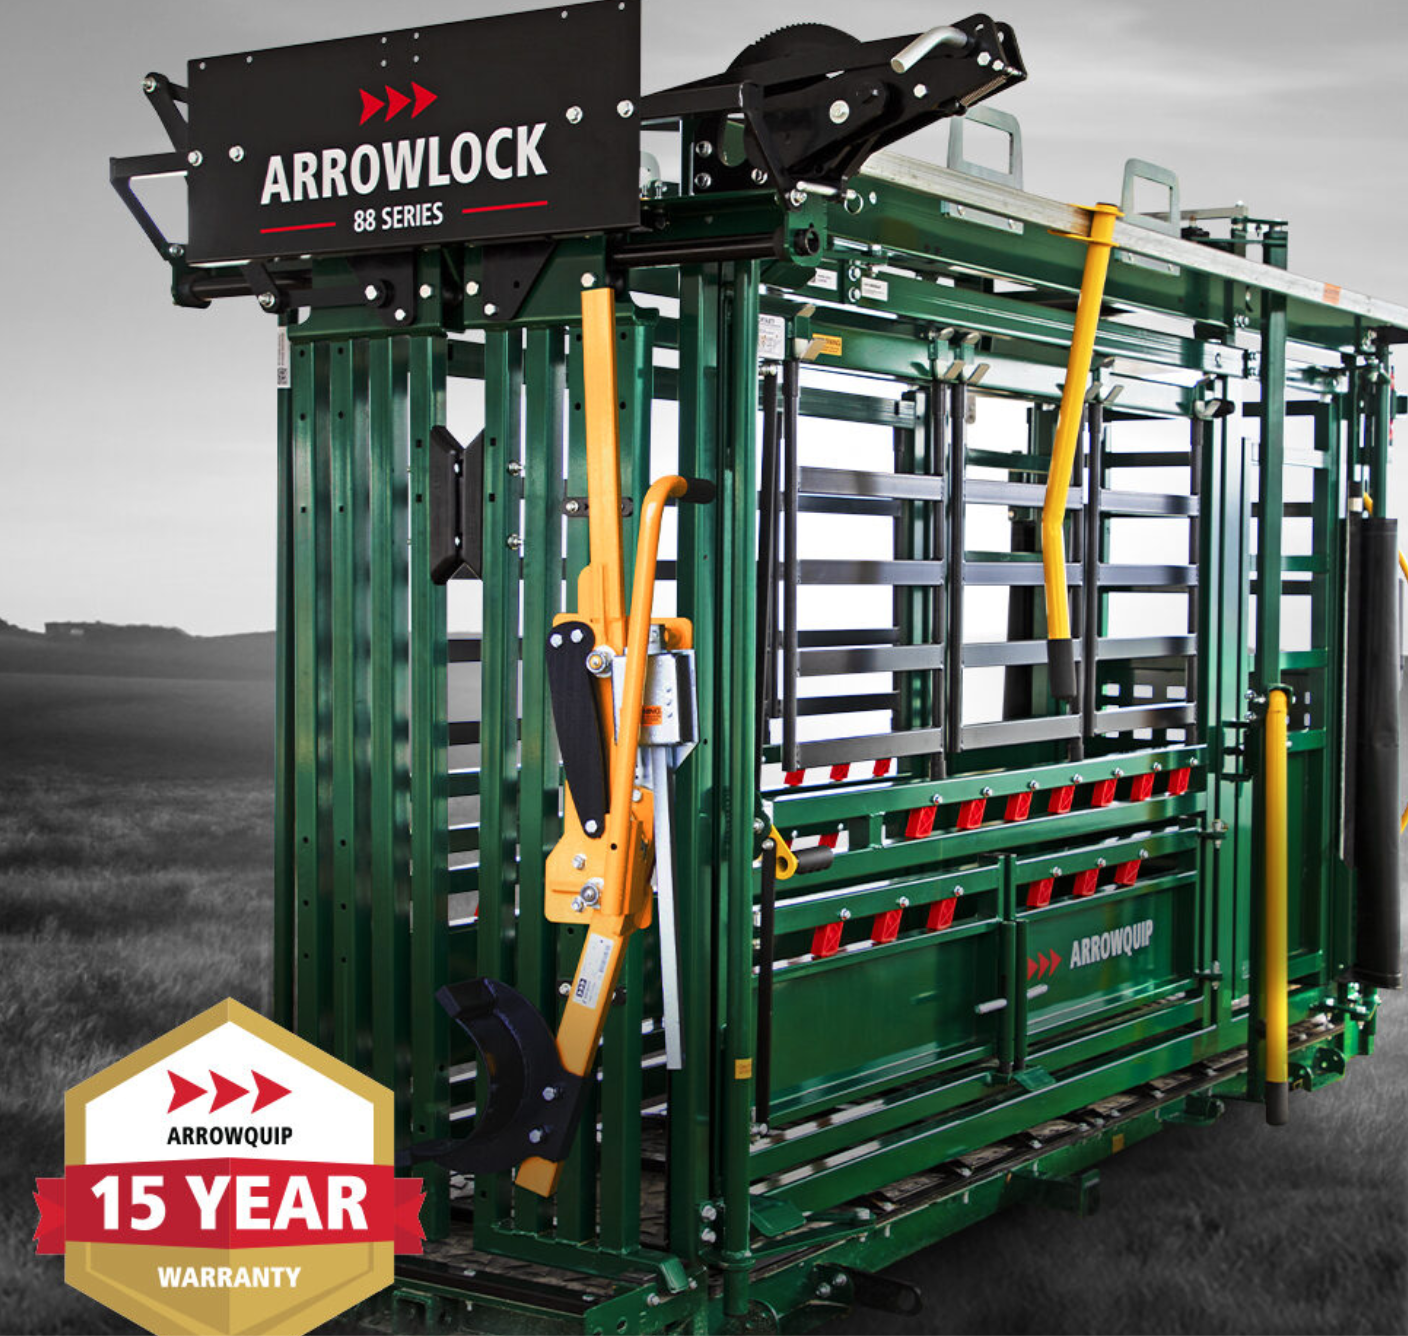 A New Era of Cattle Handling: Arrowquip's New Lineup of Cattle Equipment is Here